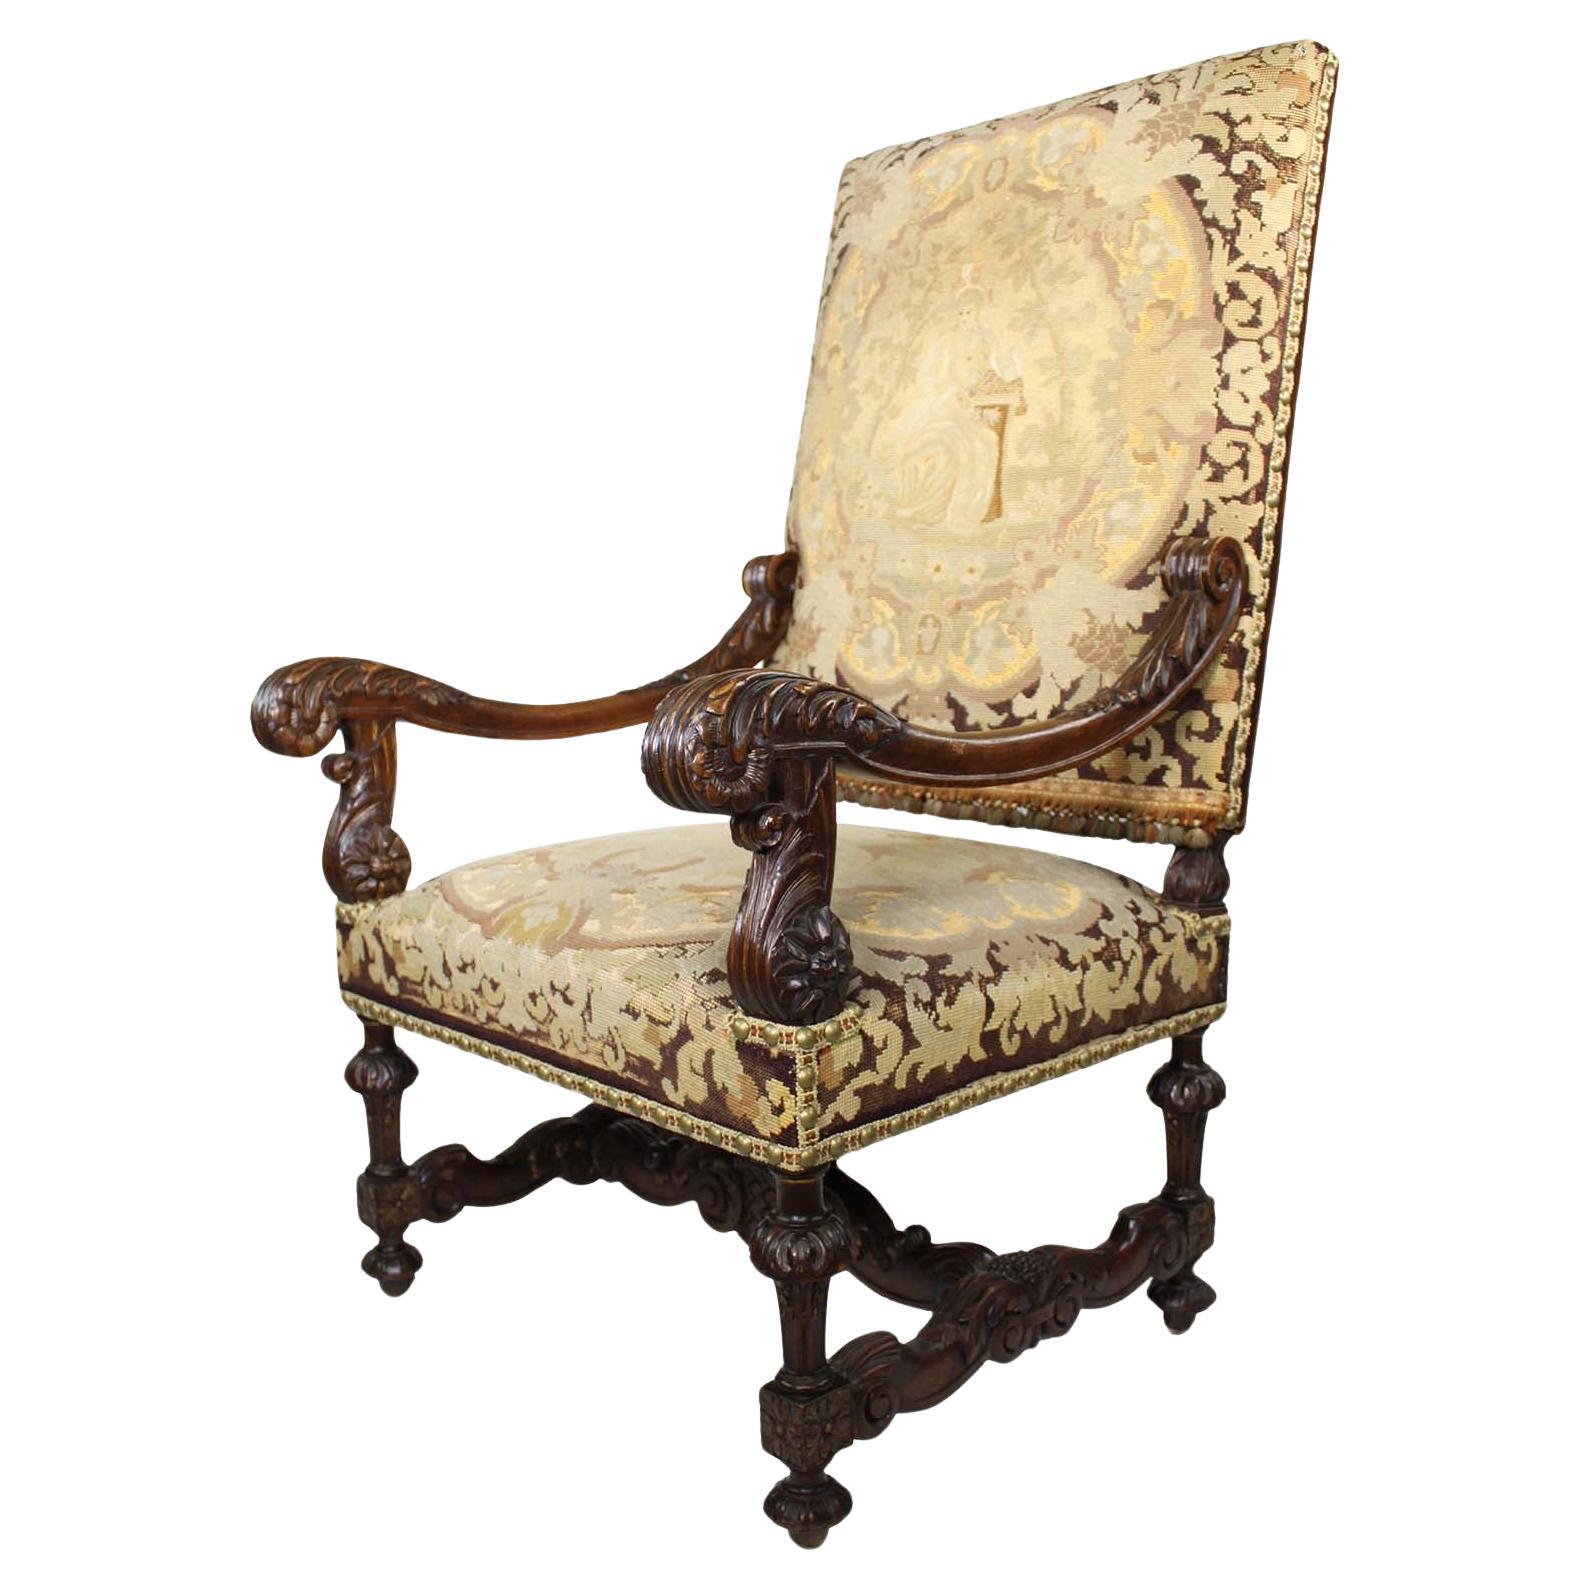 A French 19th C. Baroque Revival Style Carved Walnut Needlepoint Throne Armchair